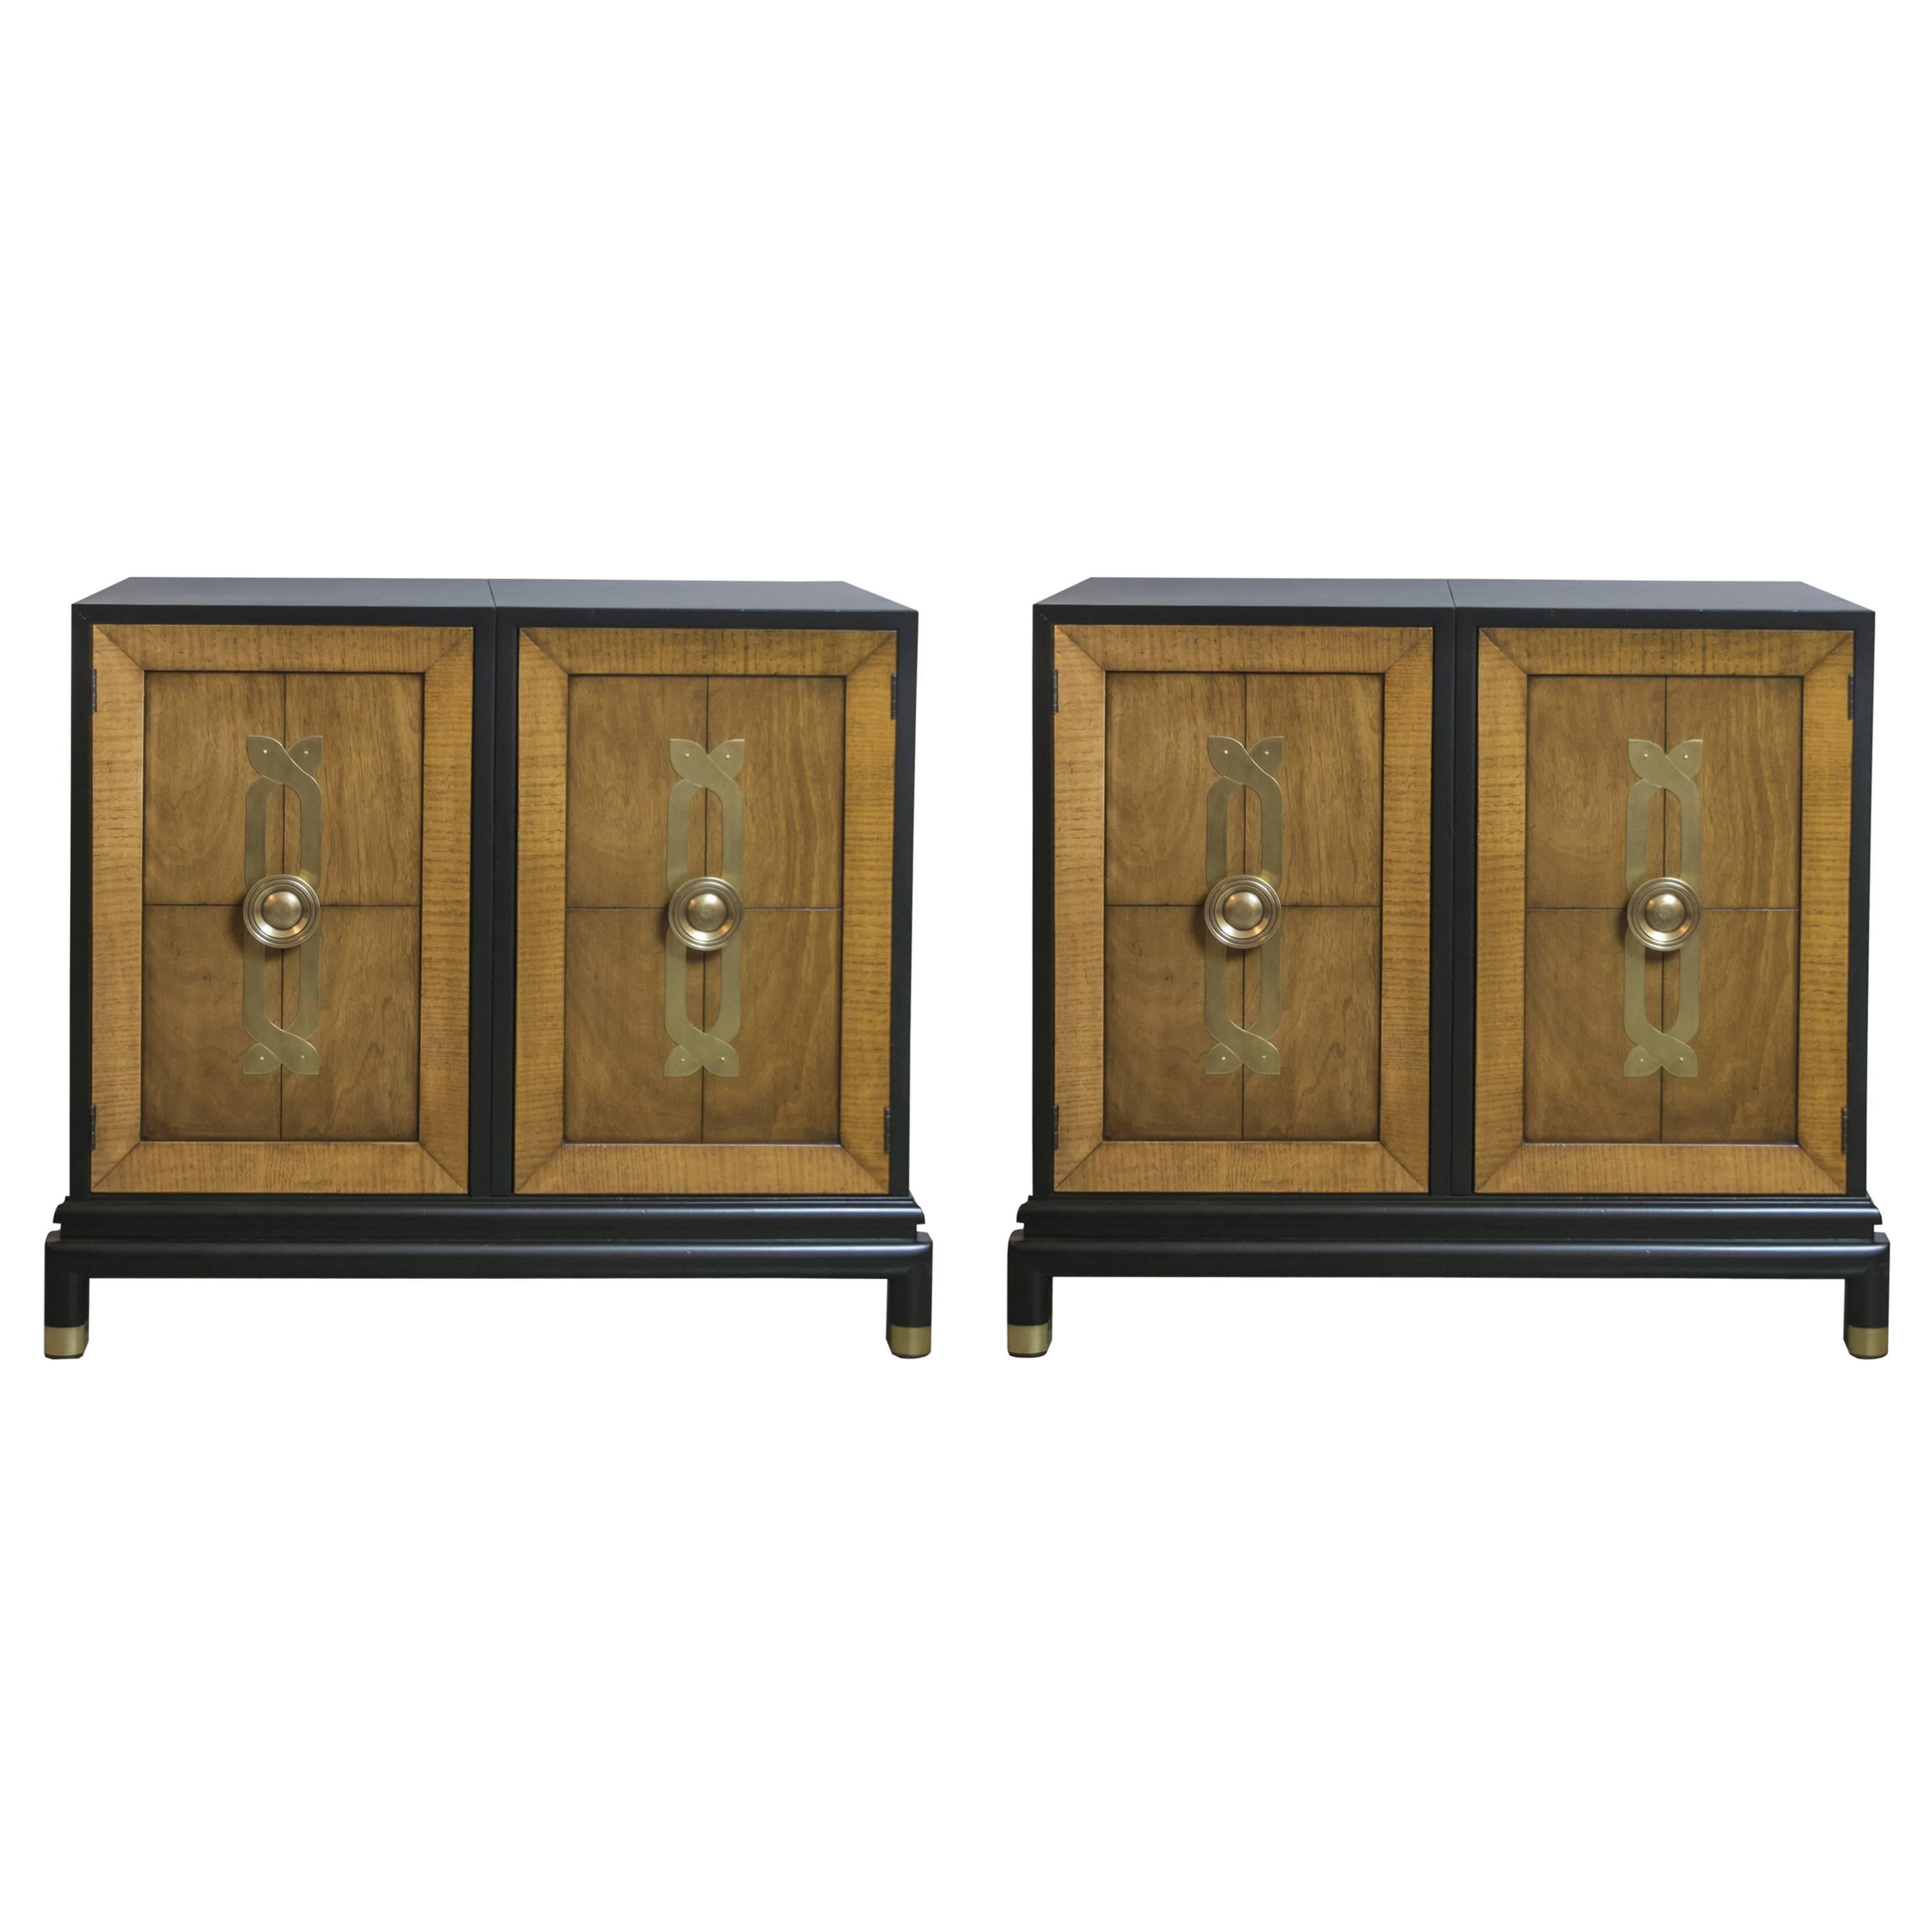 Pair of Renzo Rutili Commodes or Chests with Ebony and Brass Details